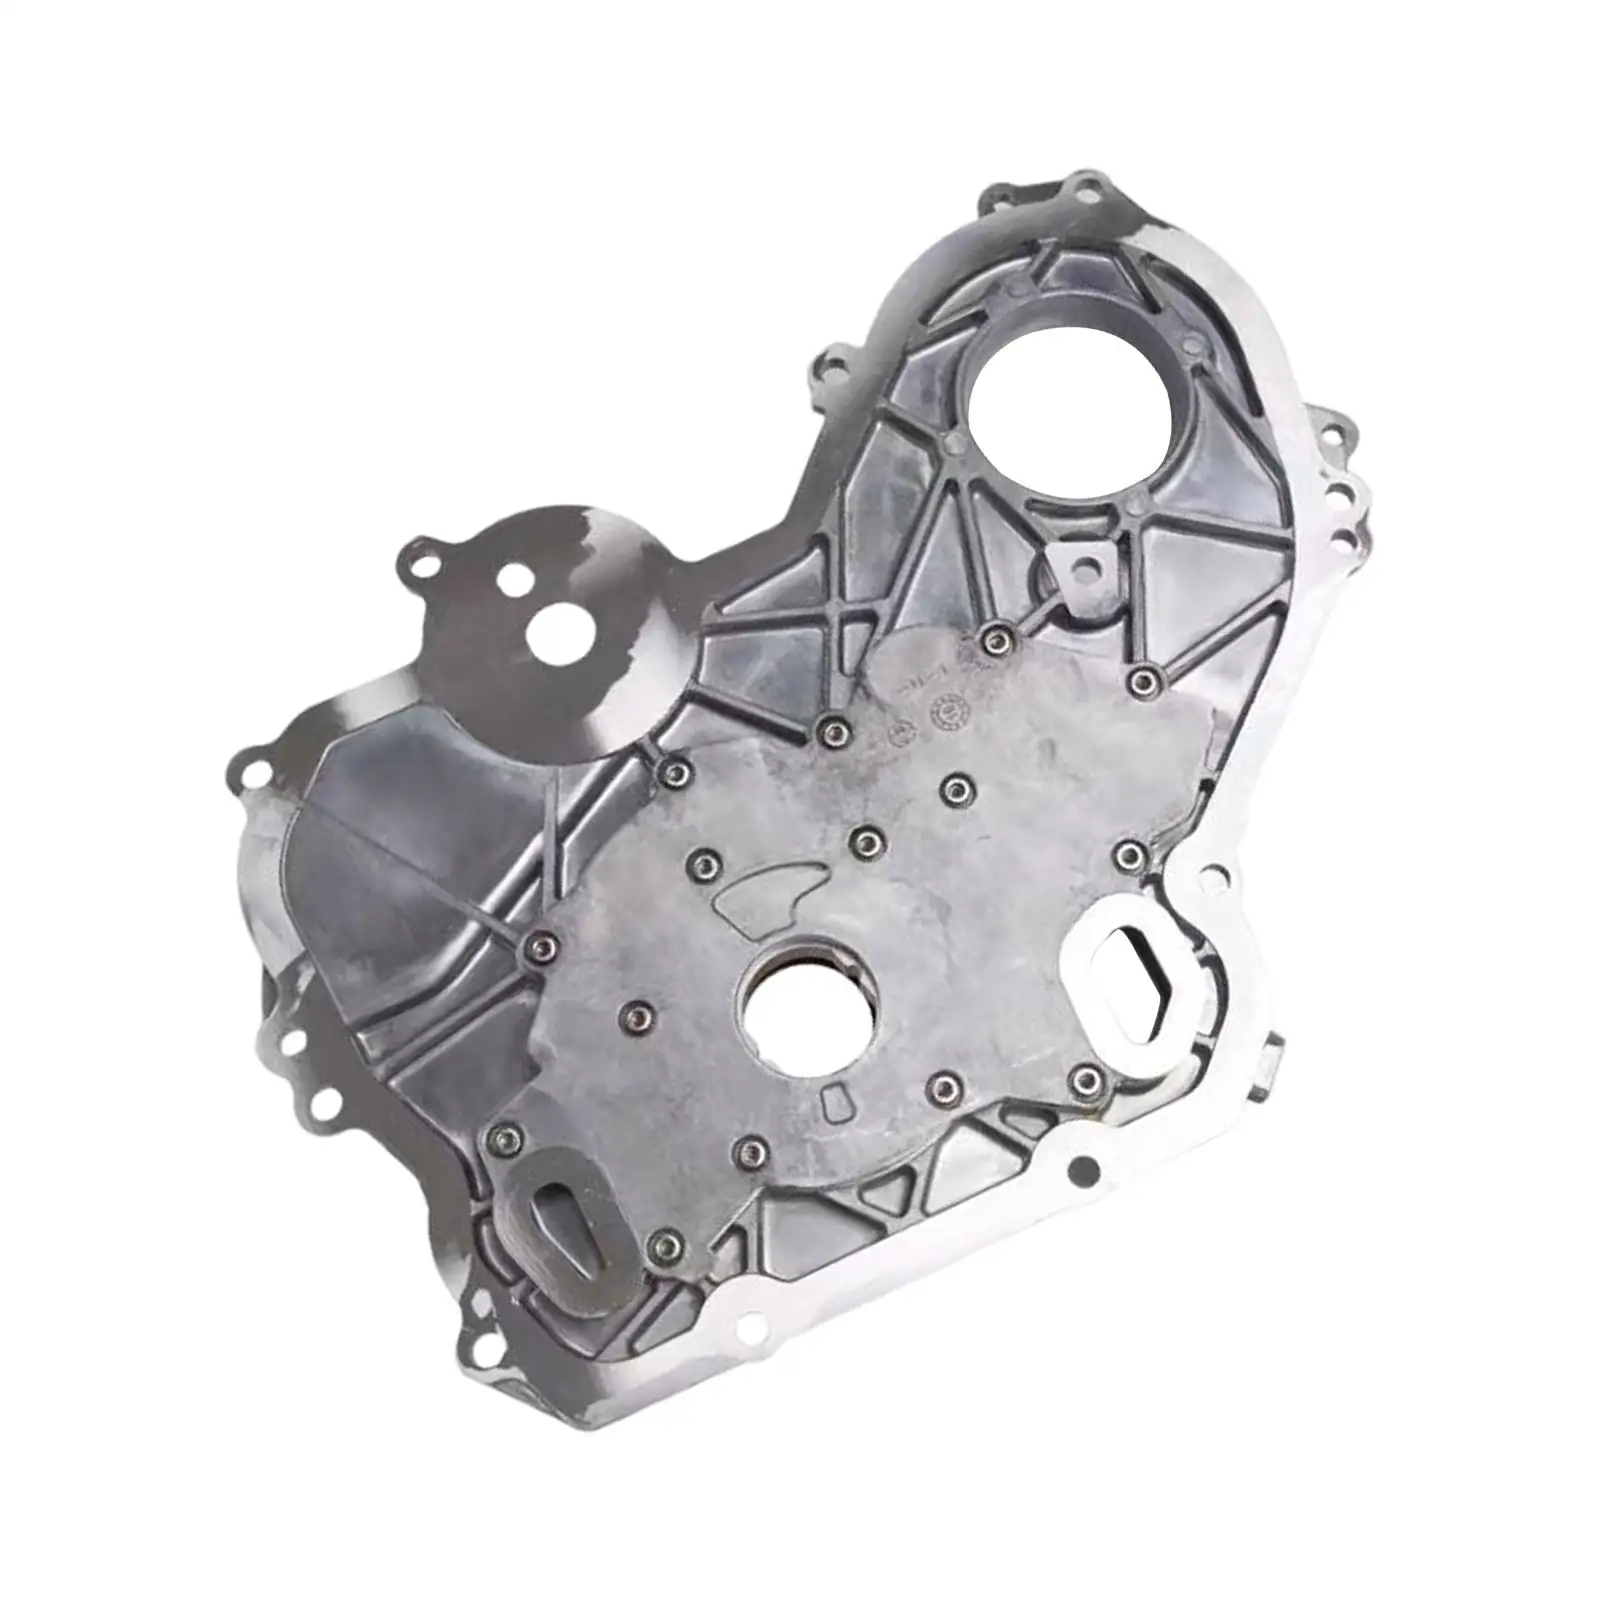 Timing Cover with Oil Pump for Chevrolet Cobalt HHR Impala Malibu